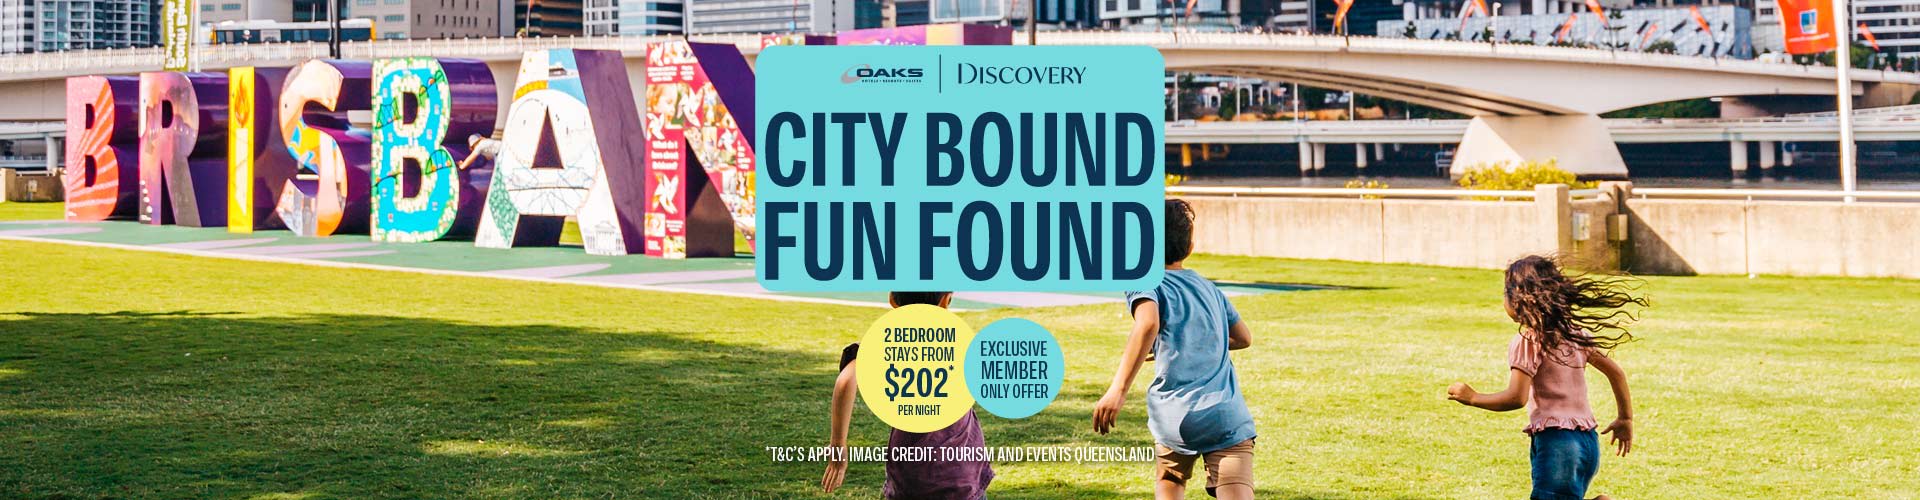 Oaks DISCOVEYR city bound fun found offer Banner 1920x500px